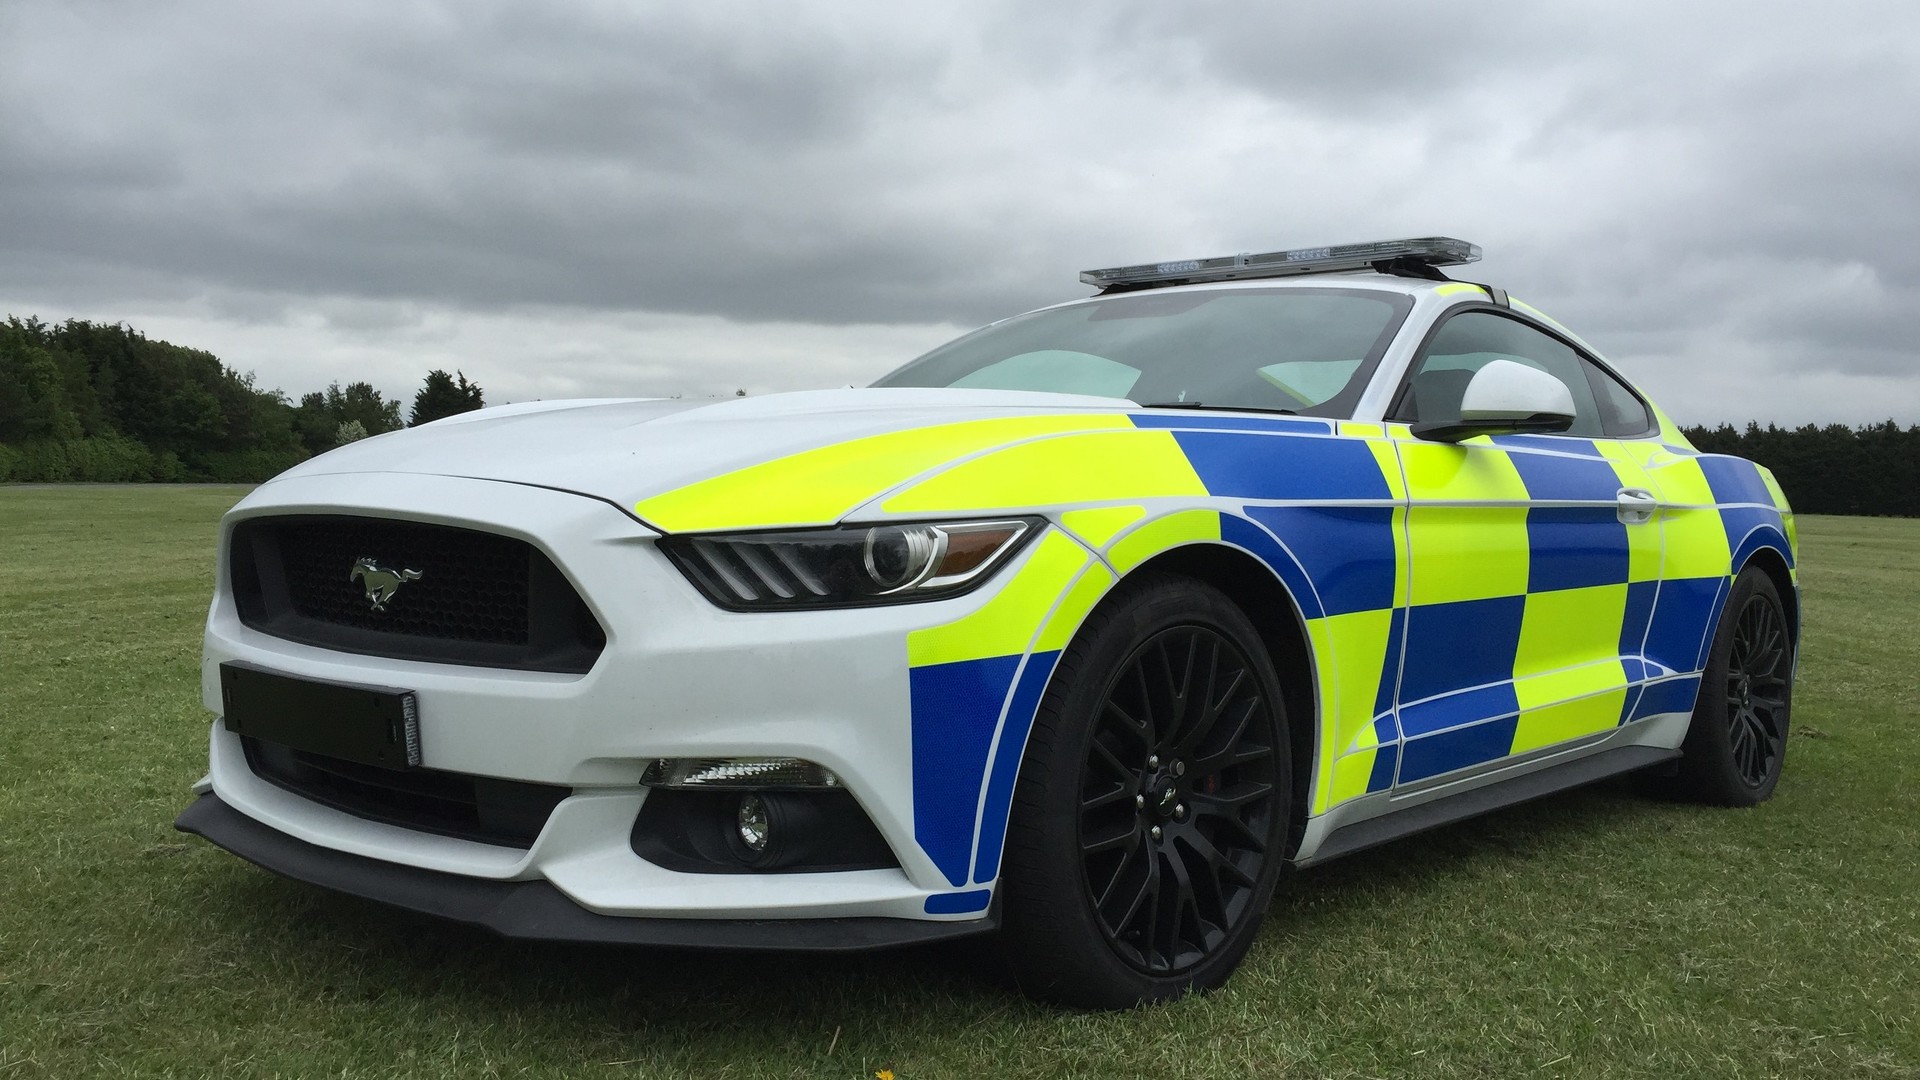 Ford Mustang UK police car prototype could be crushed